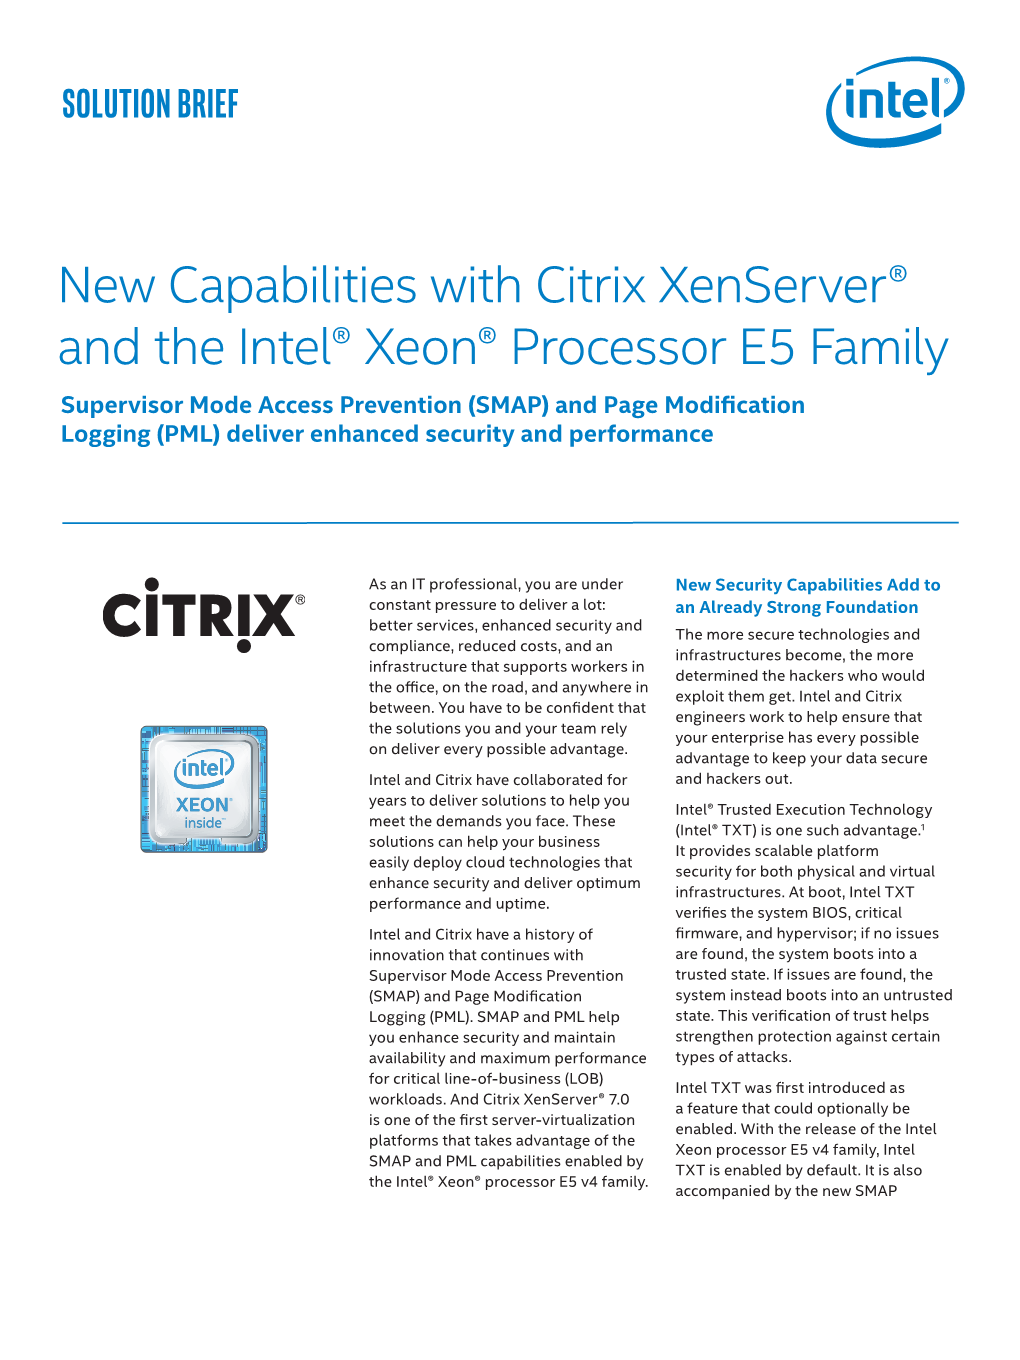 Cloud Security with Citrix Xenserver and Intel Xeon E5